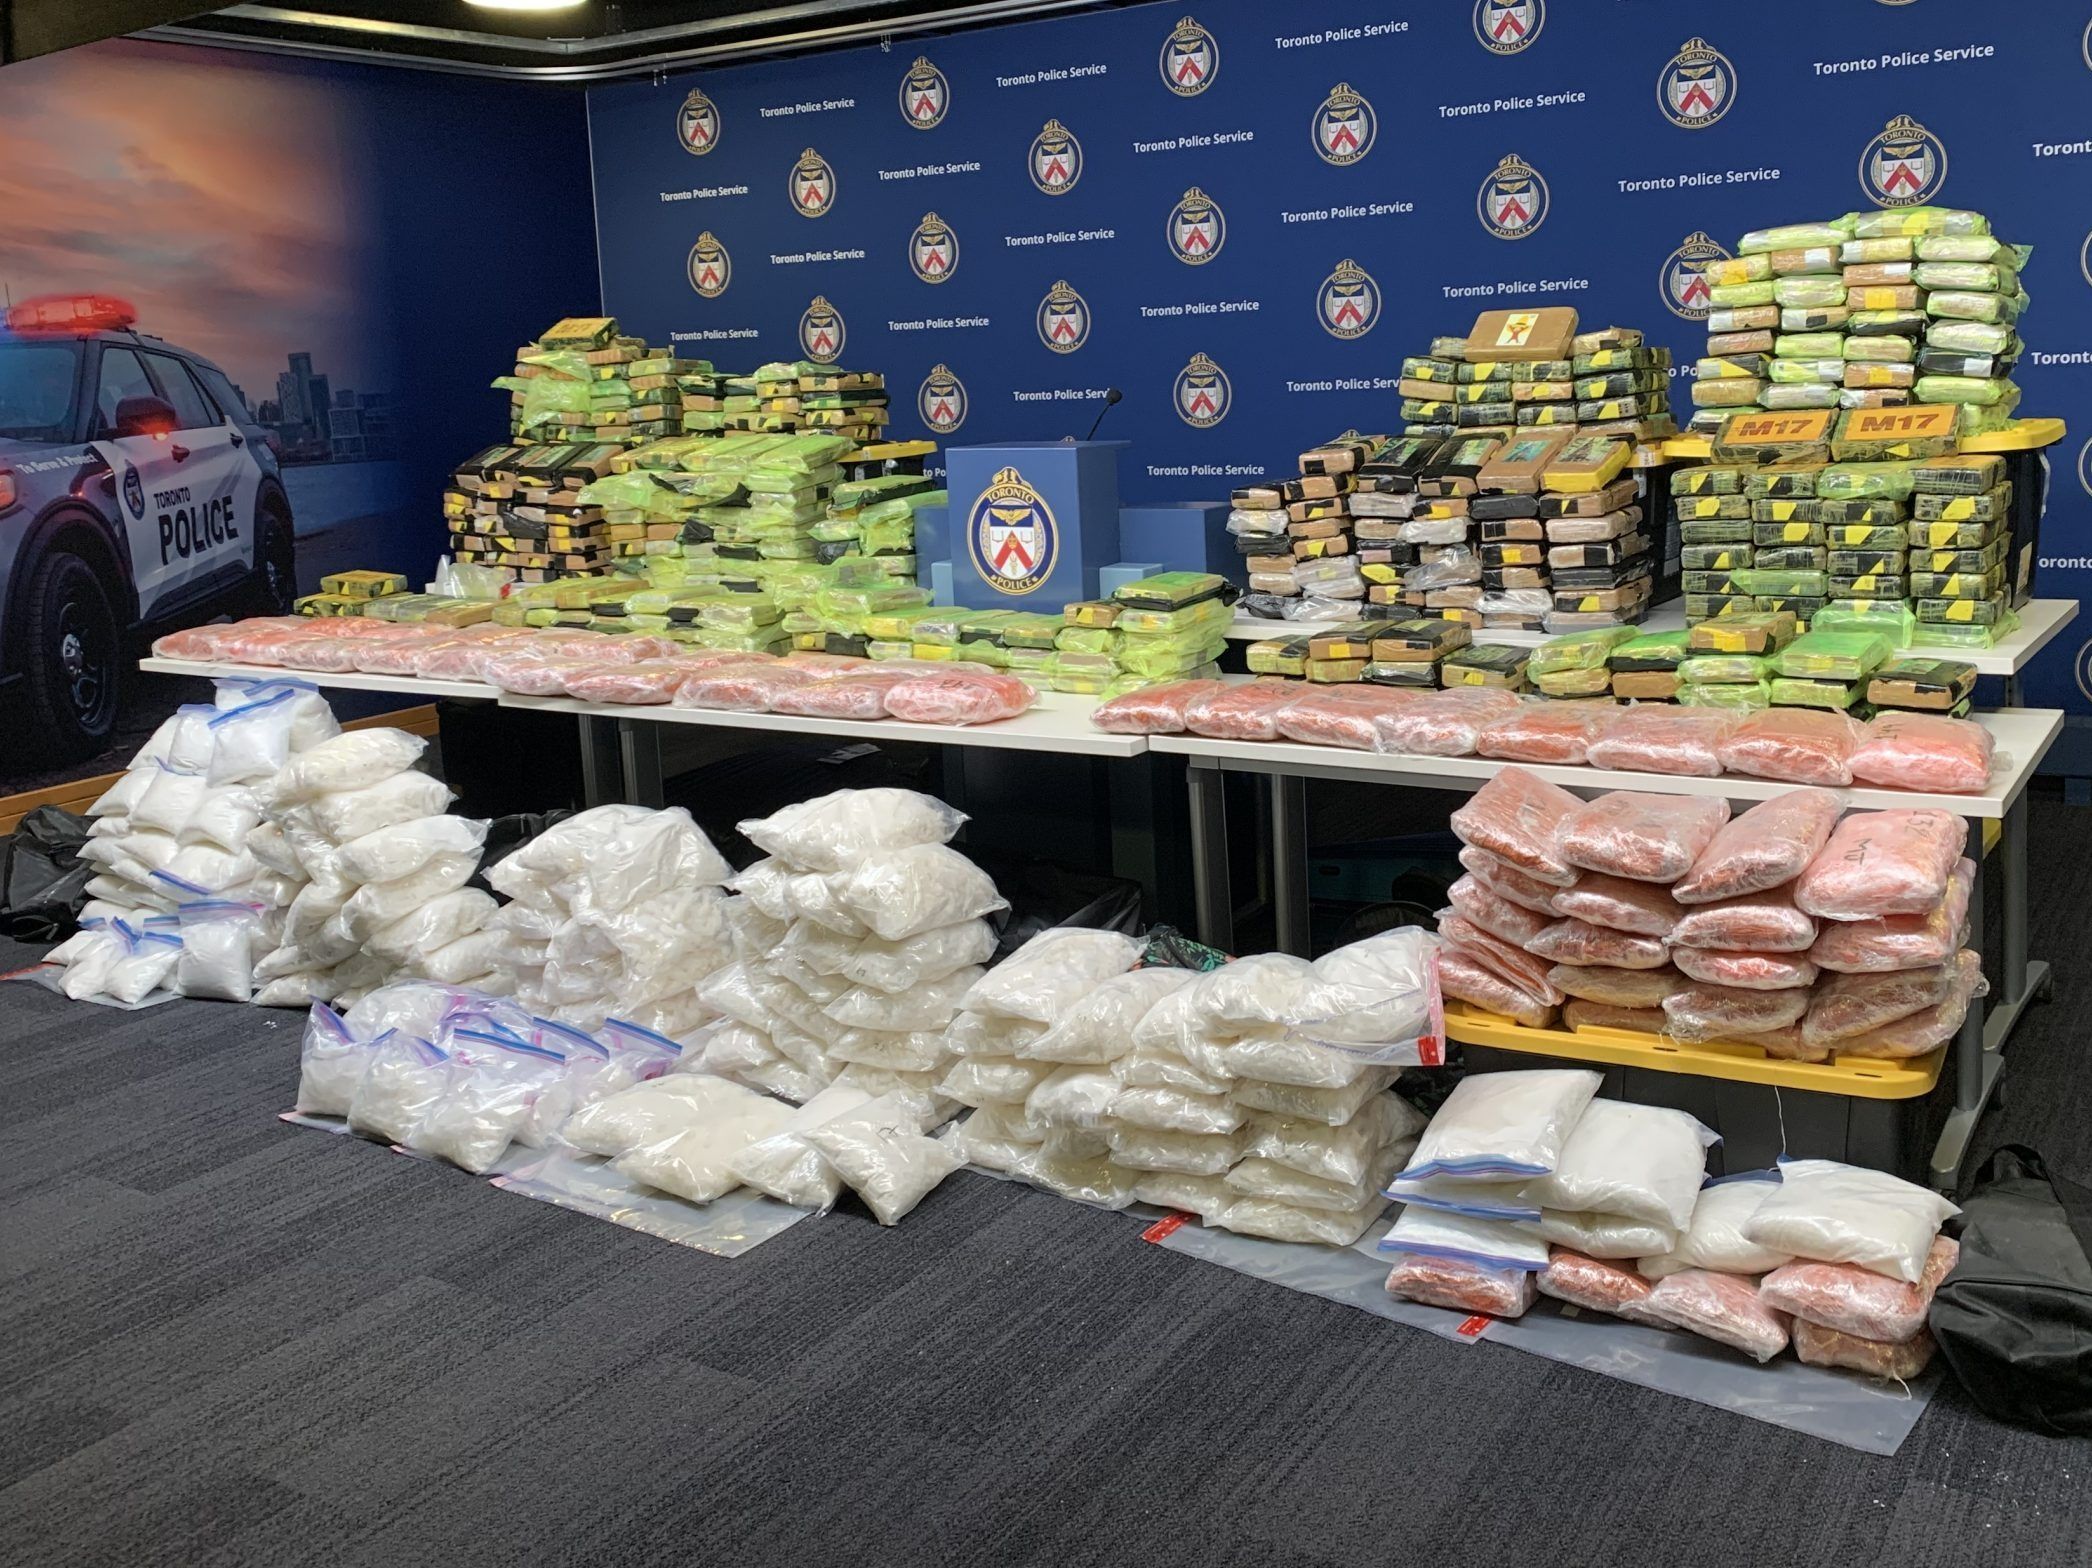 Seven charged in largest coke and meth bust in Toronto Police history